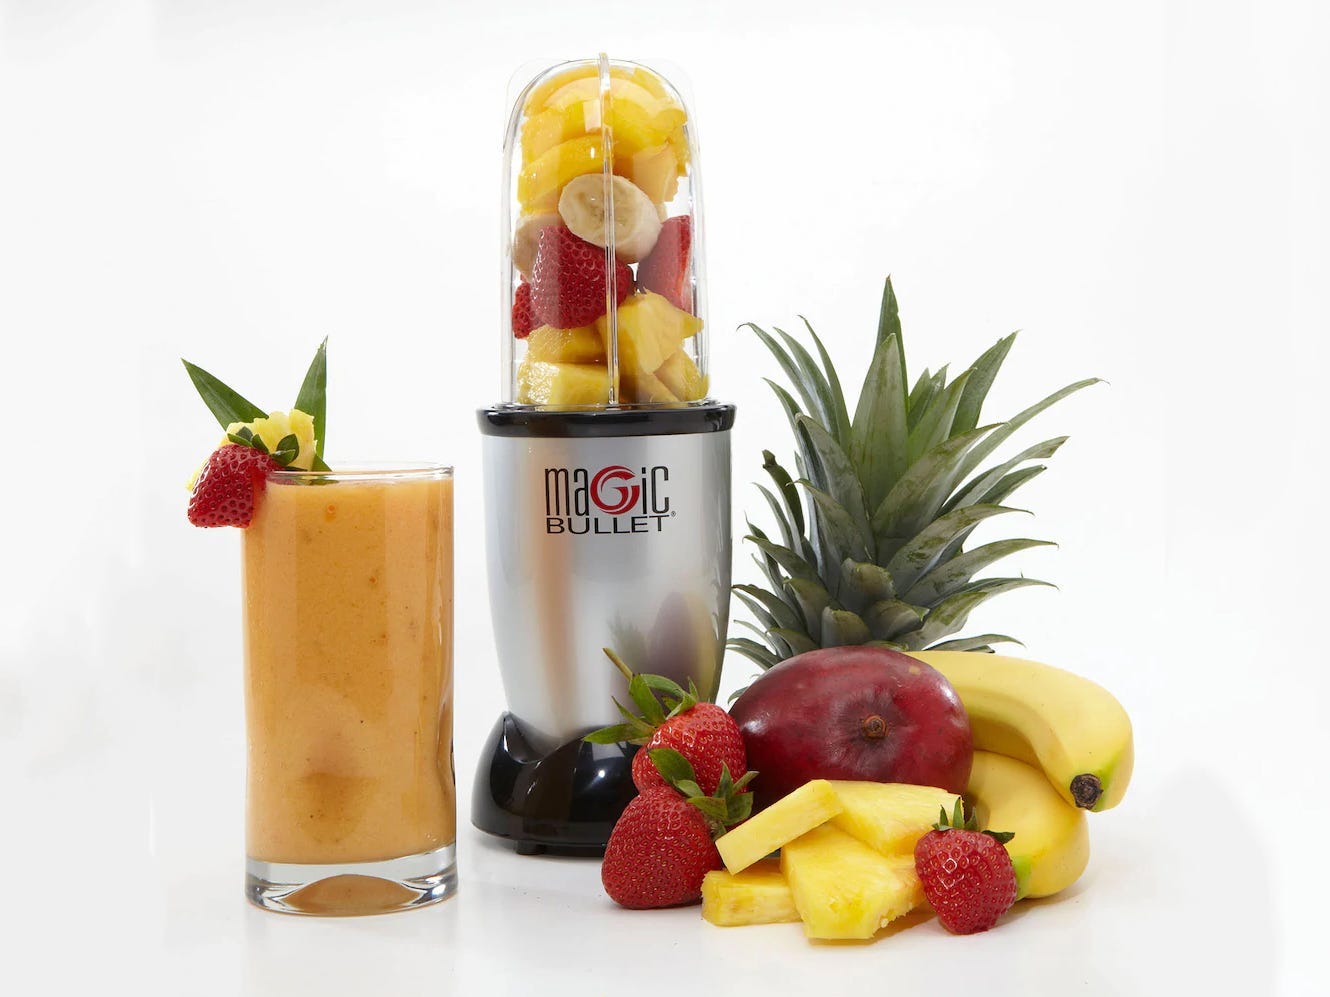 Magic Bullet blender with sliced fruit inside set next to a pile of whole fruit and a glass containing a smoothie.